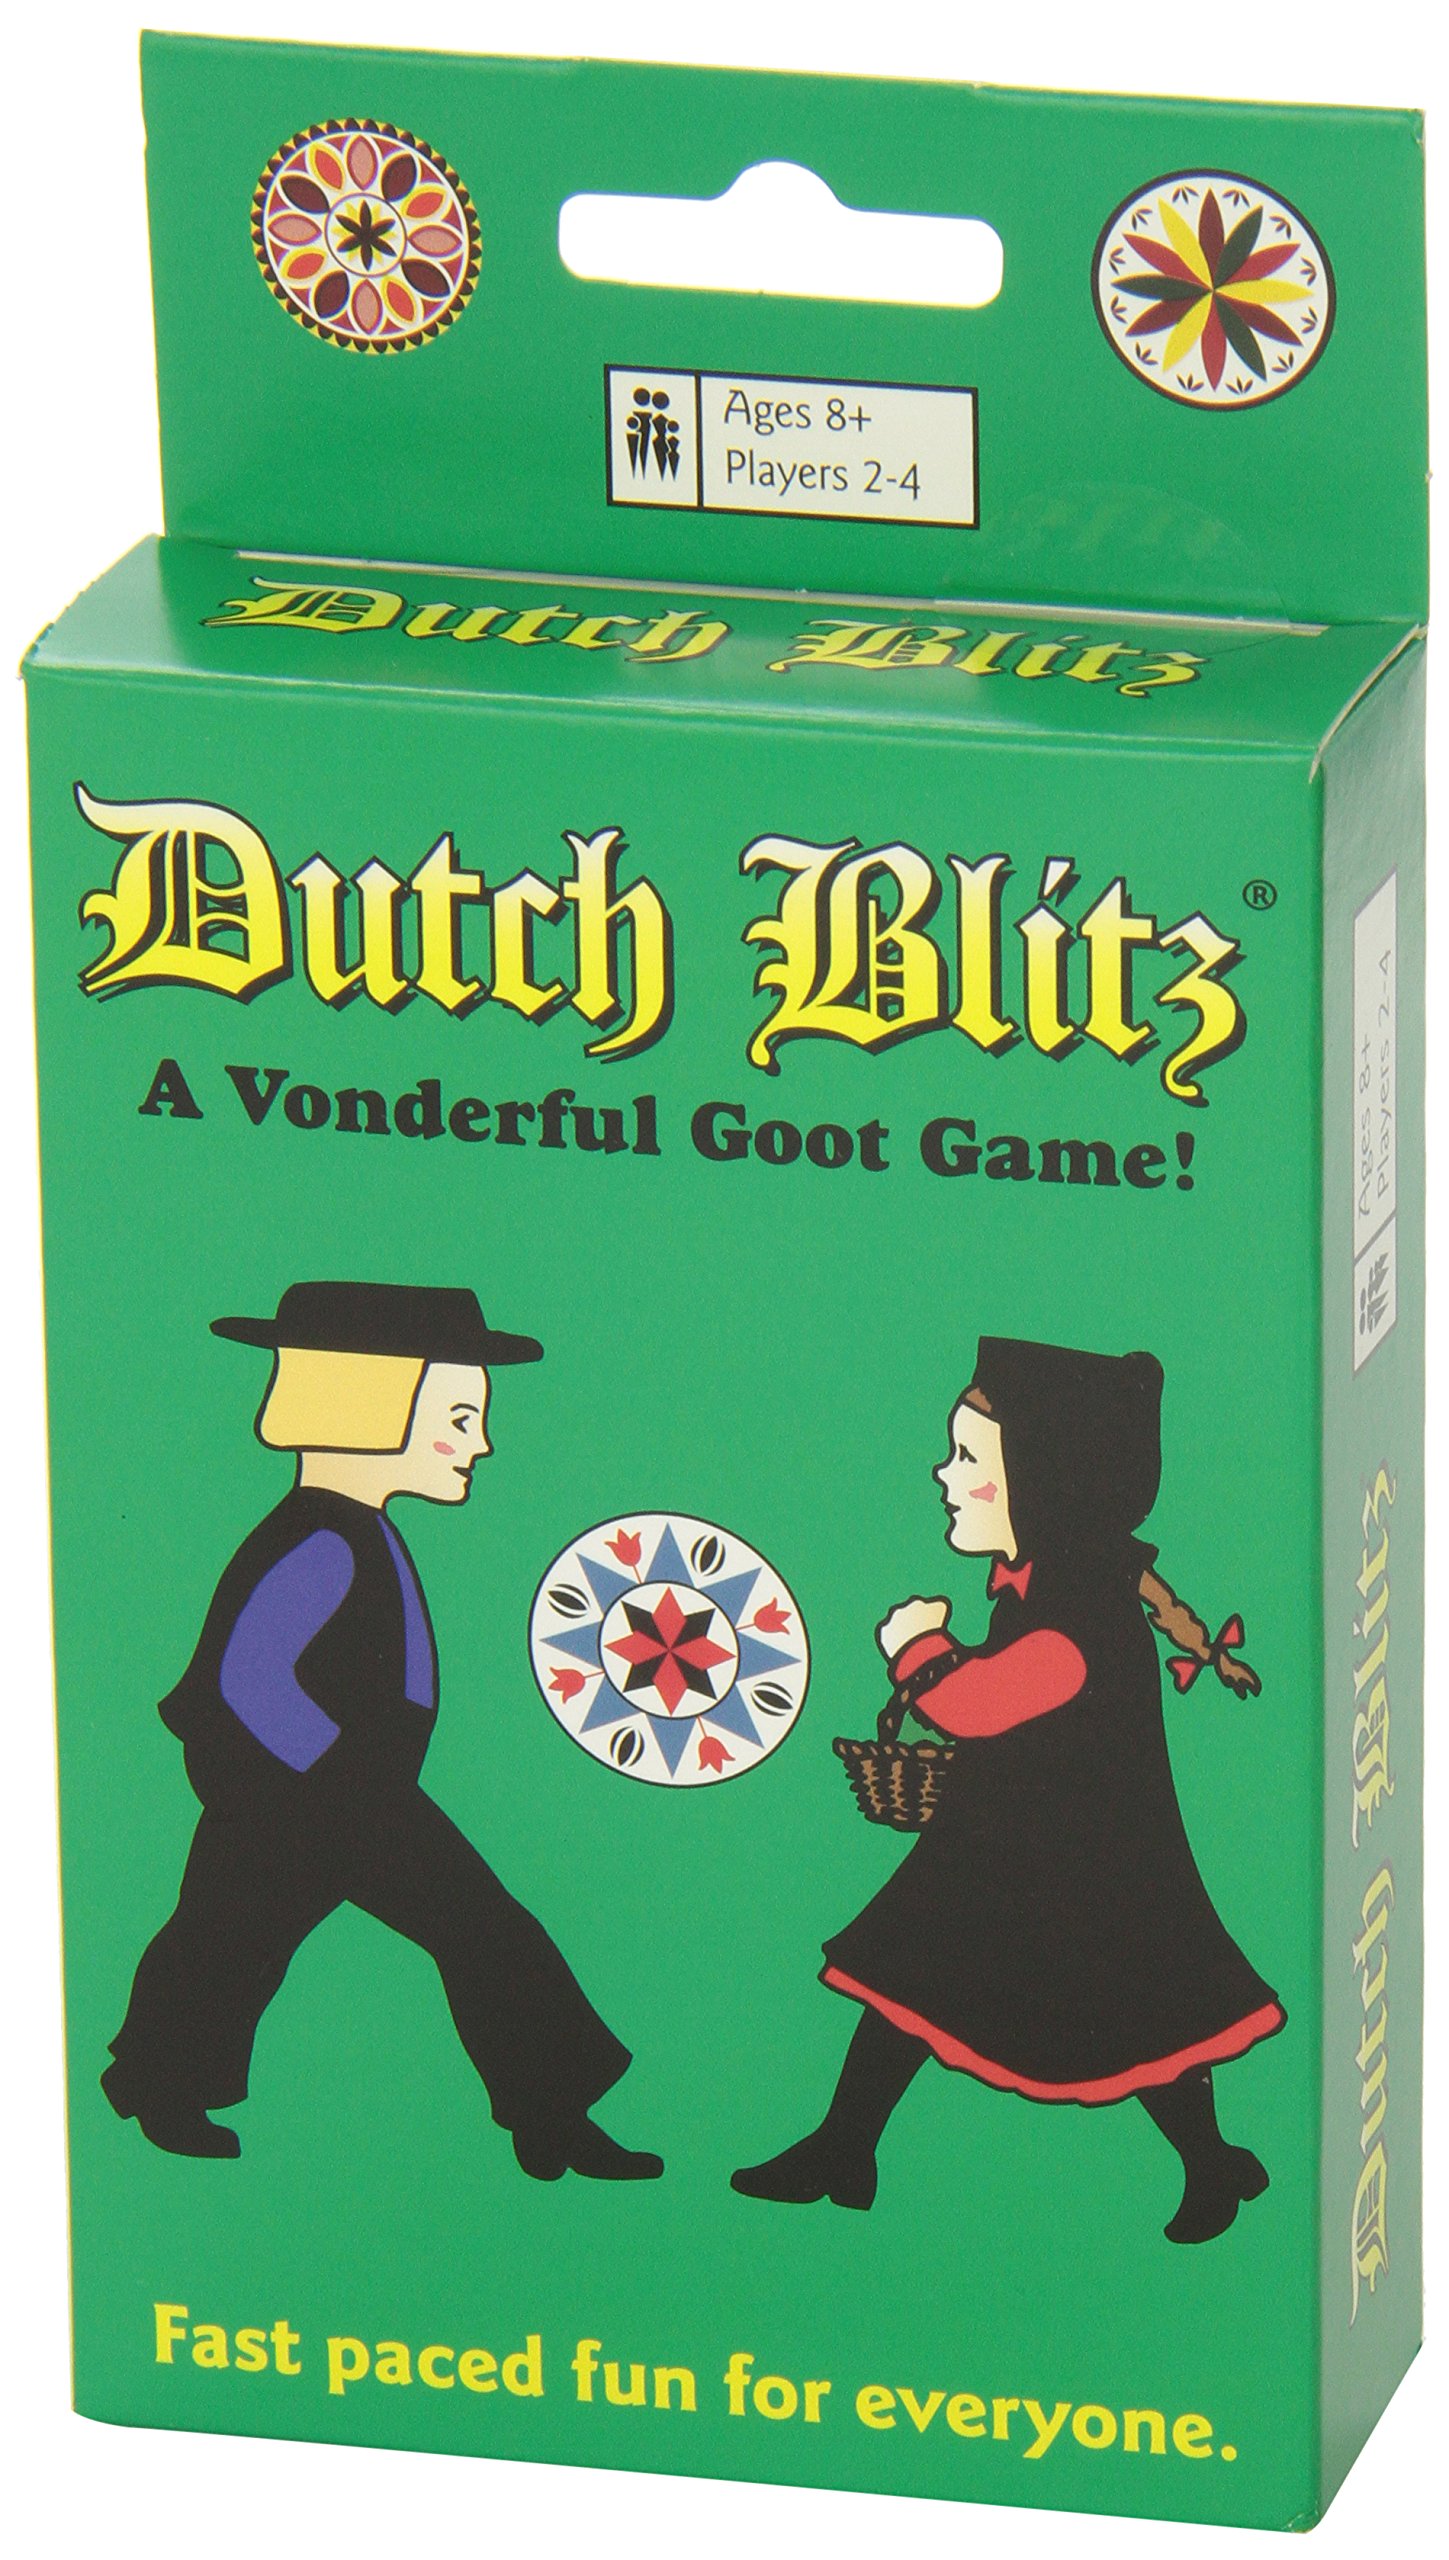 Dutch Blitz: The Original Fast Paced Card Game, Contains 160 Cards, Quick and Easy to Learn, Great Family Game, Fun for Everyone, for 2 to 4 Players, for Ages 8 and Up